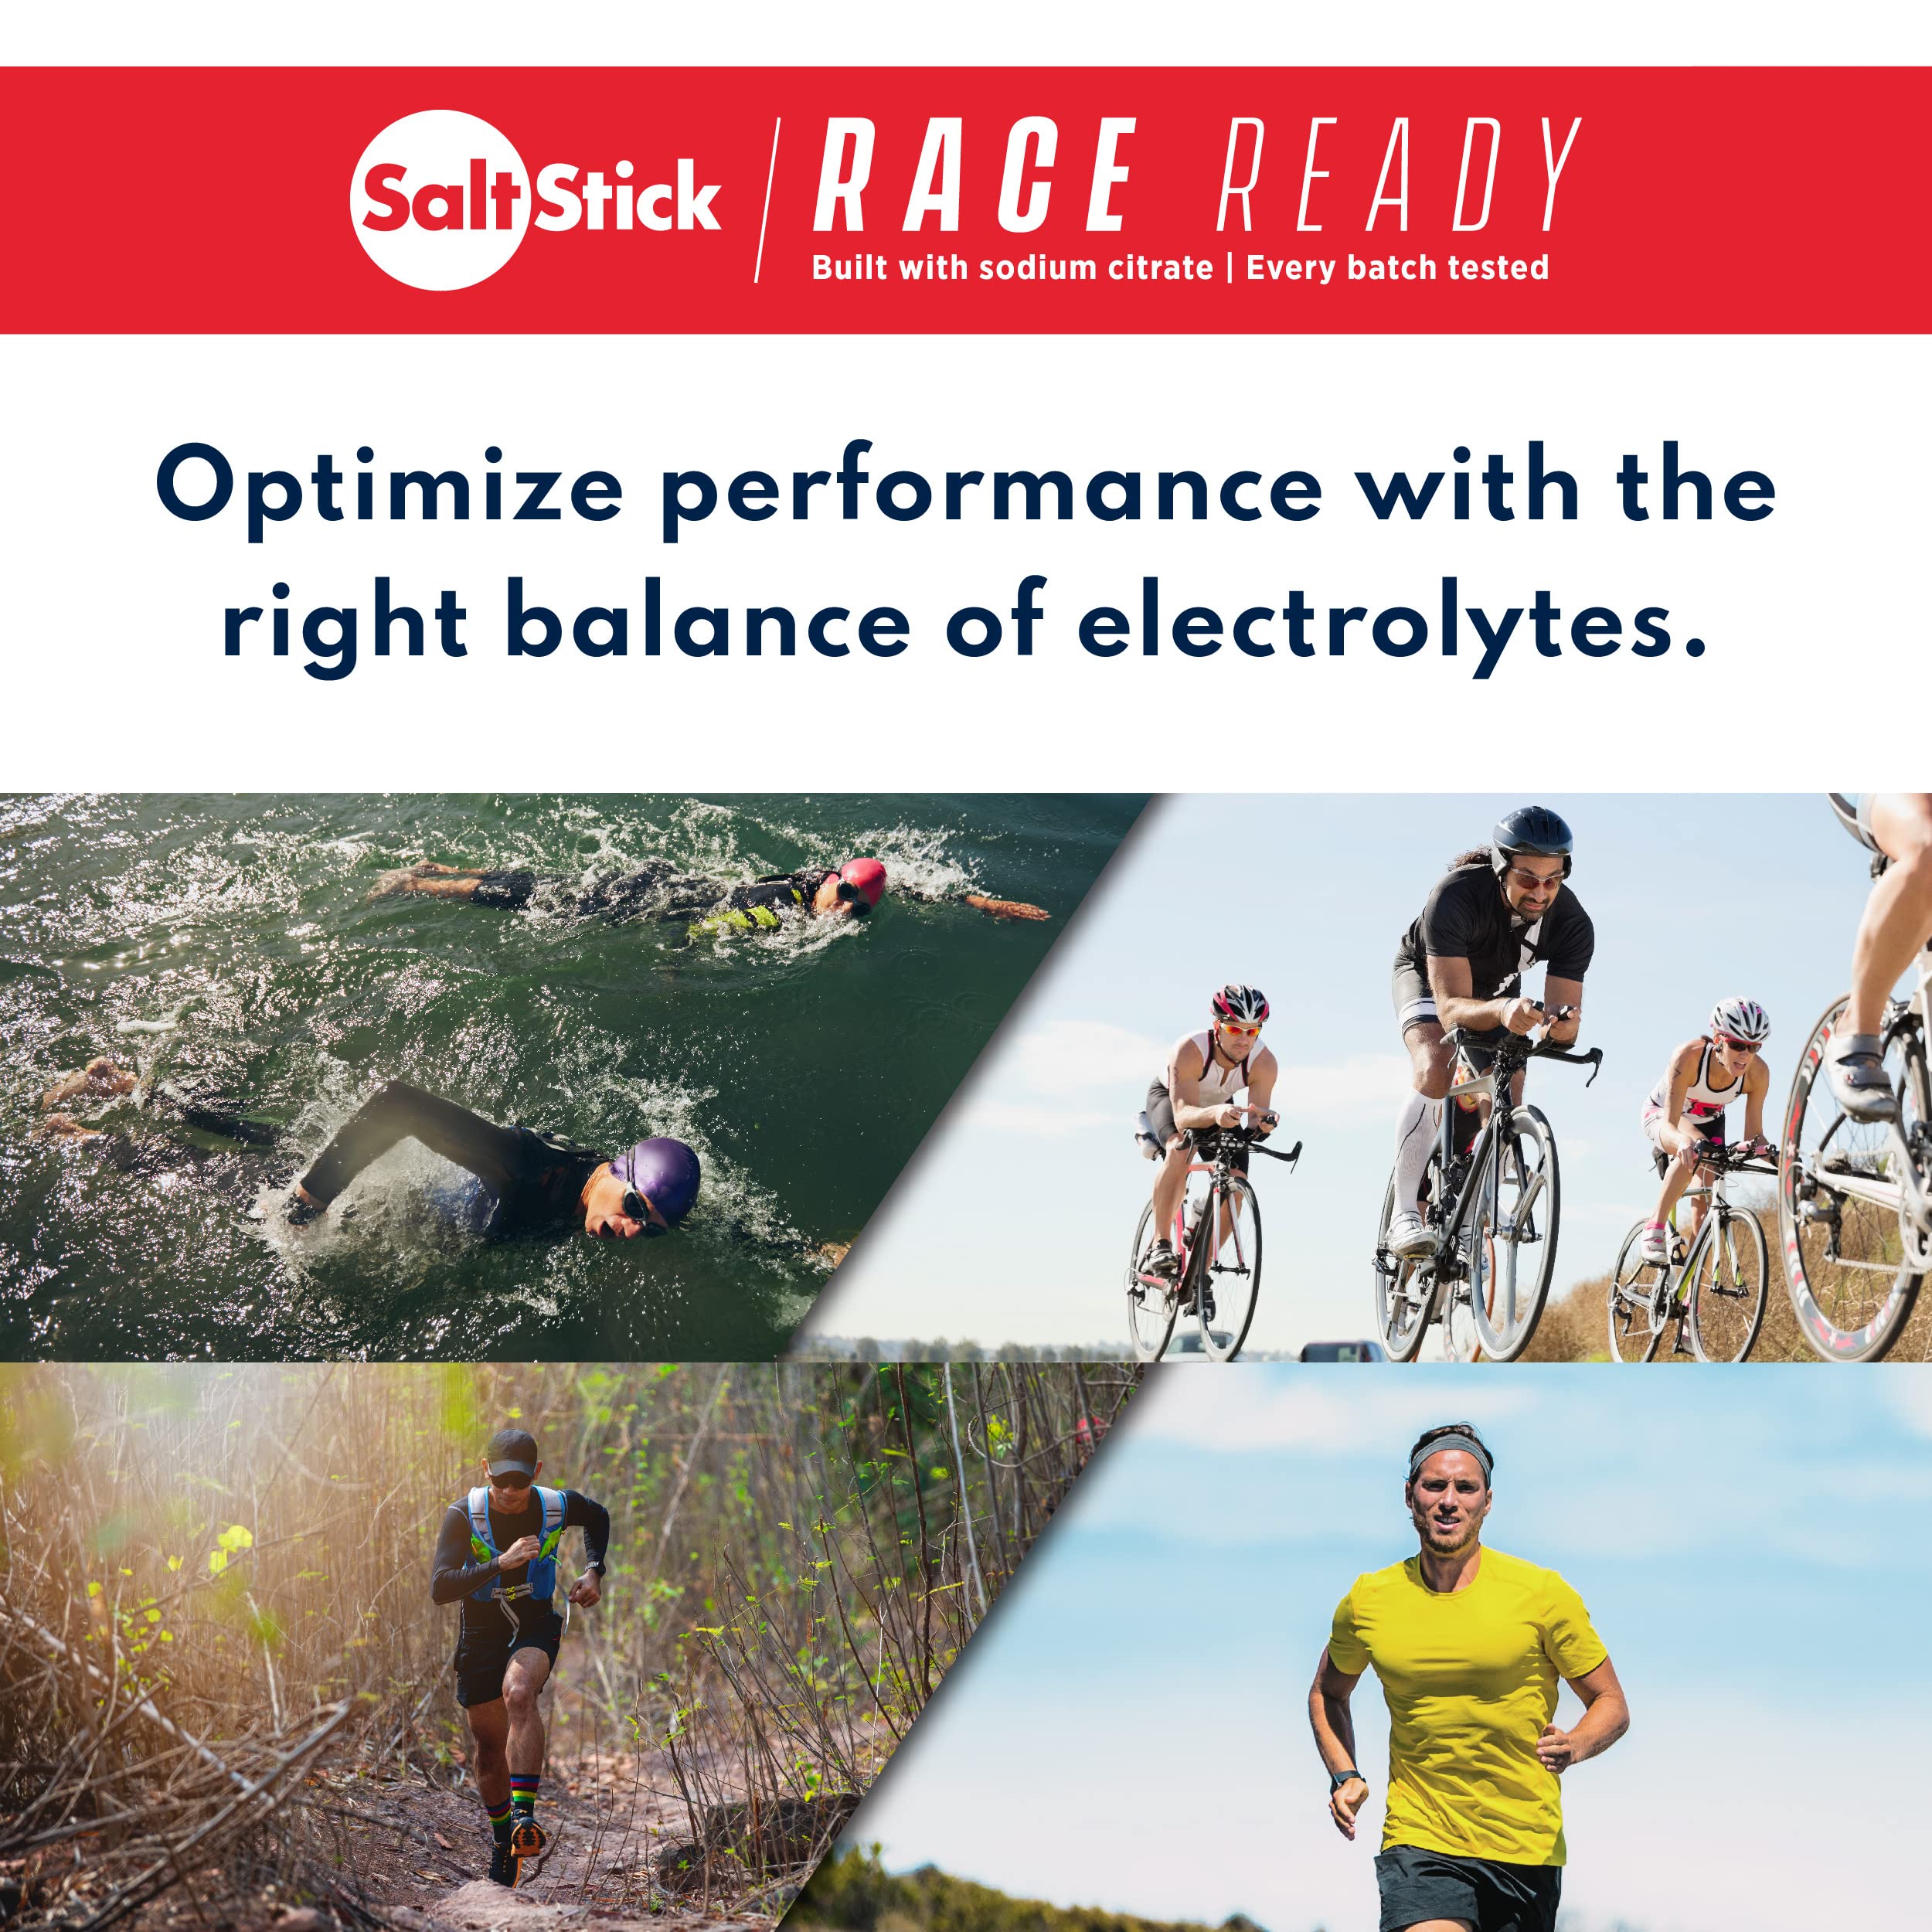 SaltStick Race Ready Caps, Informed Sport Certified Electrolyte Replacement Capsules with Sodium Citrate to Reduce Heat Stress, Muscle Cramping and Maintain Electrolyte Levels, 100 Count